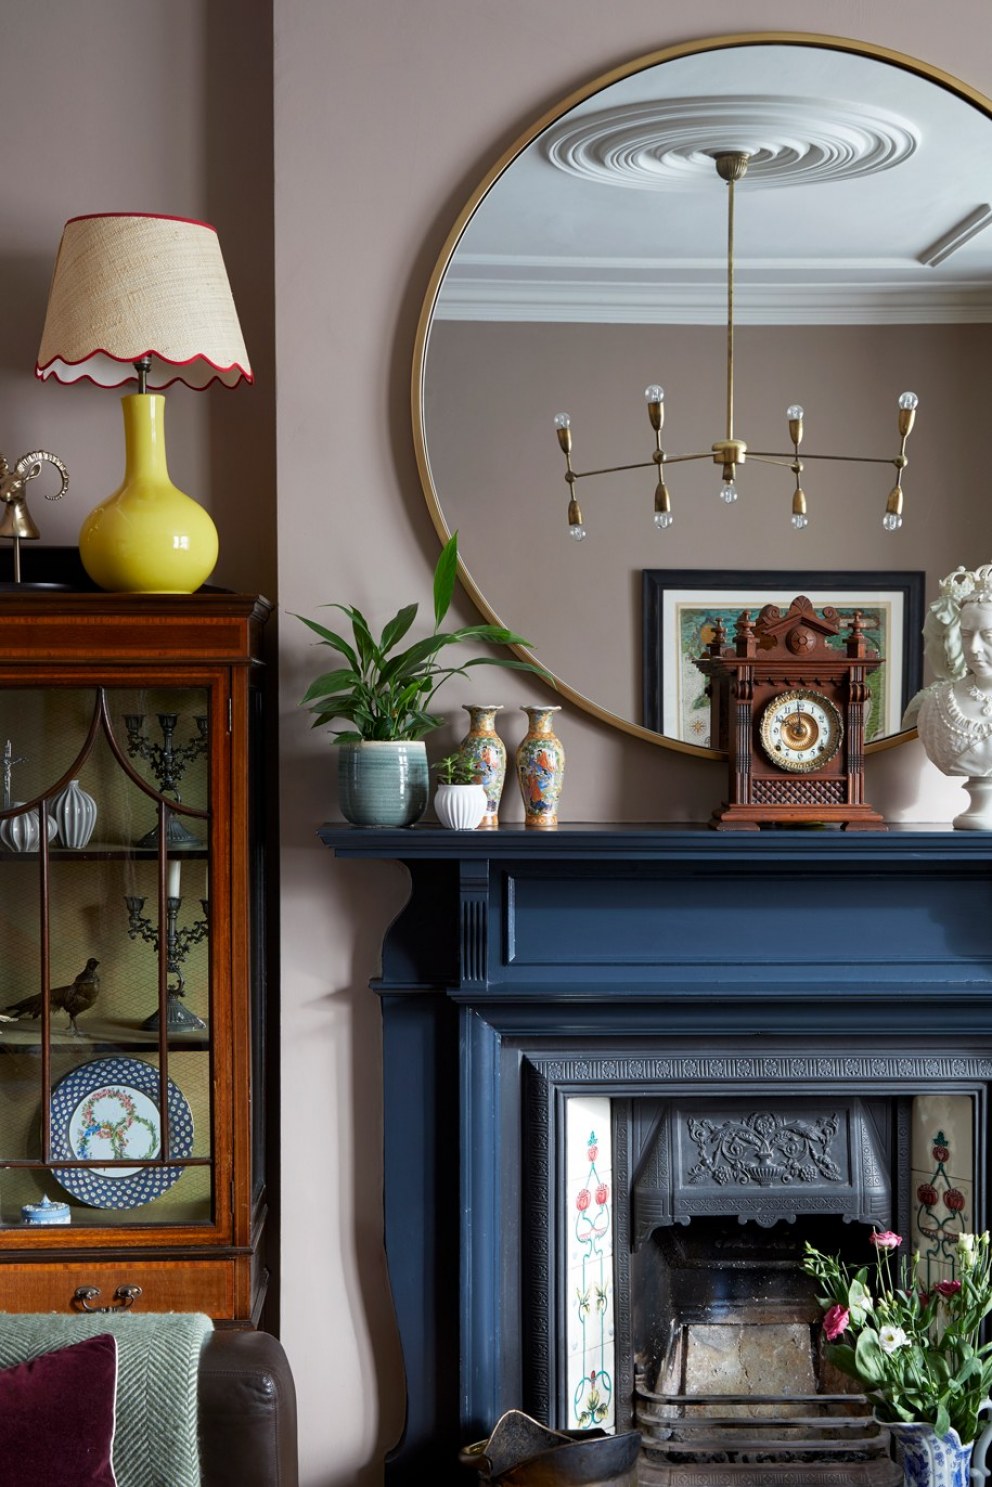 Residential Home | Mantelpiece and lighting detail | Interior Designers